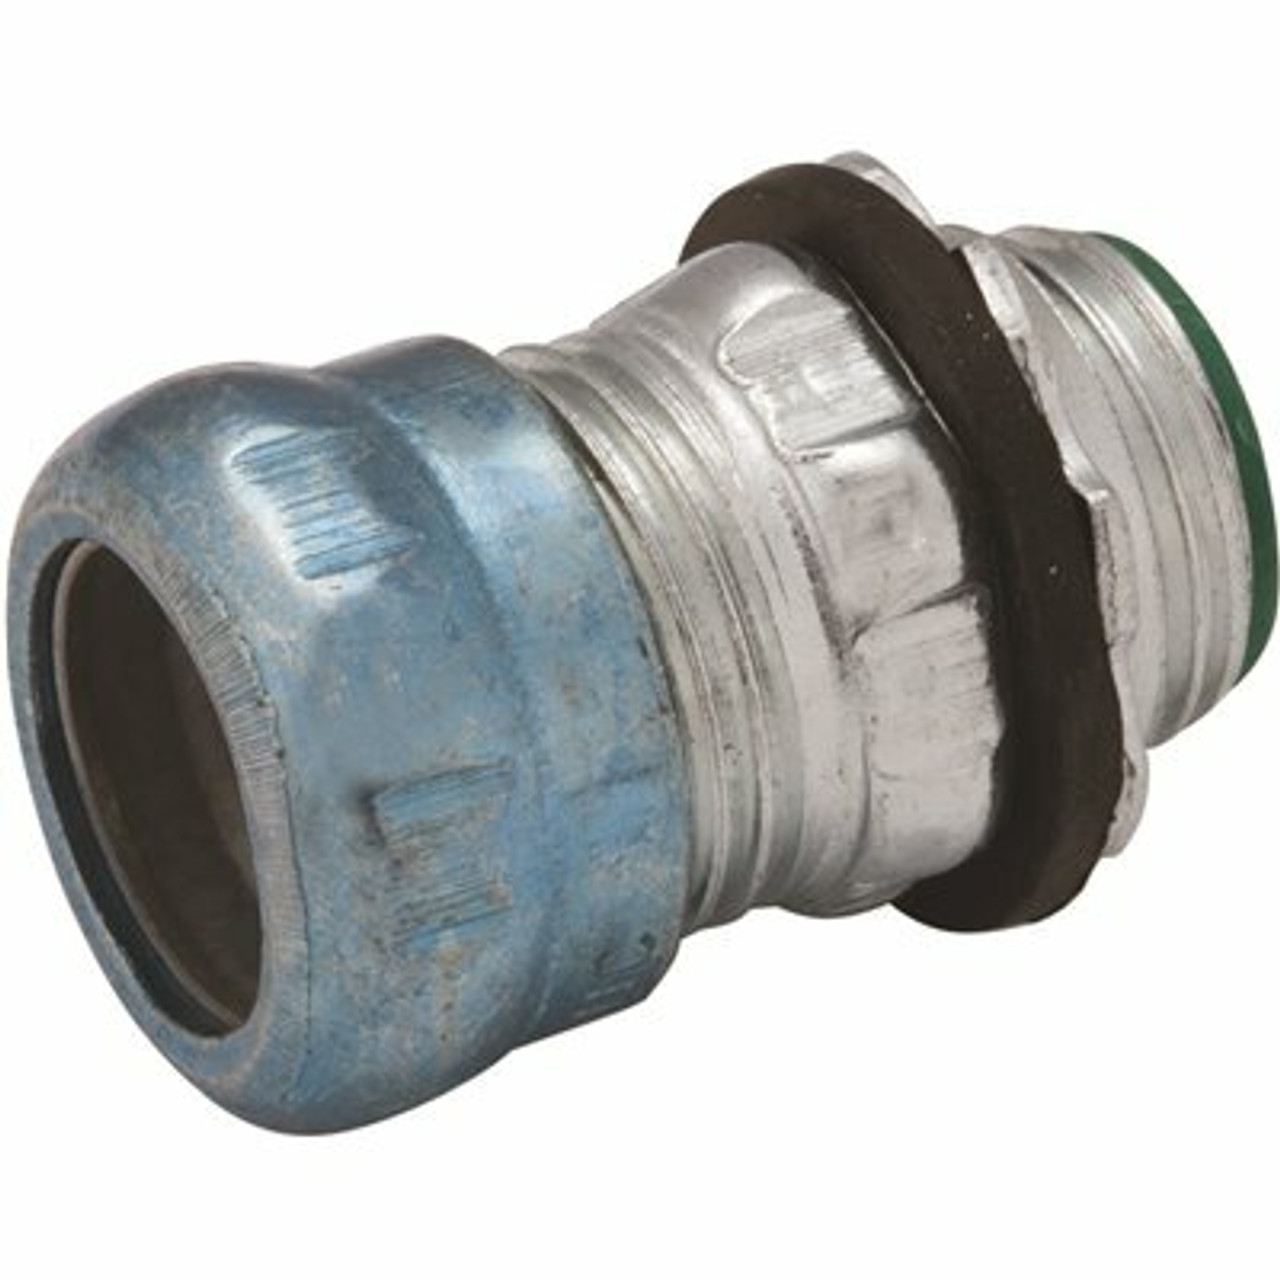 Raco 2 In. Emt Raintight Compression Connector, Insulated